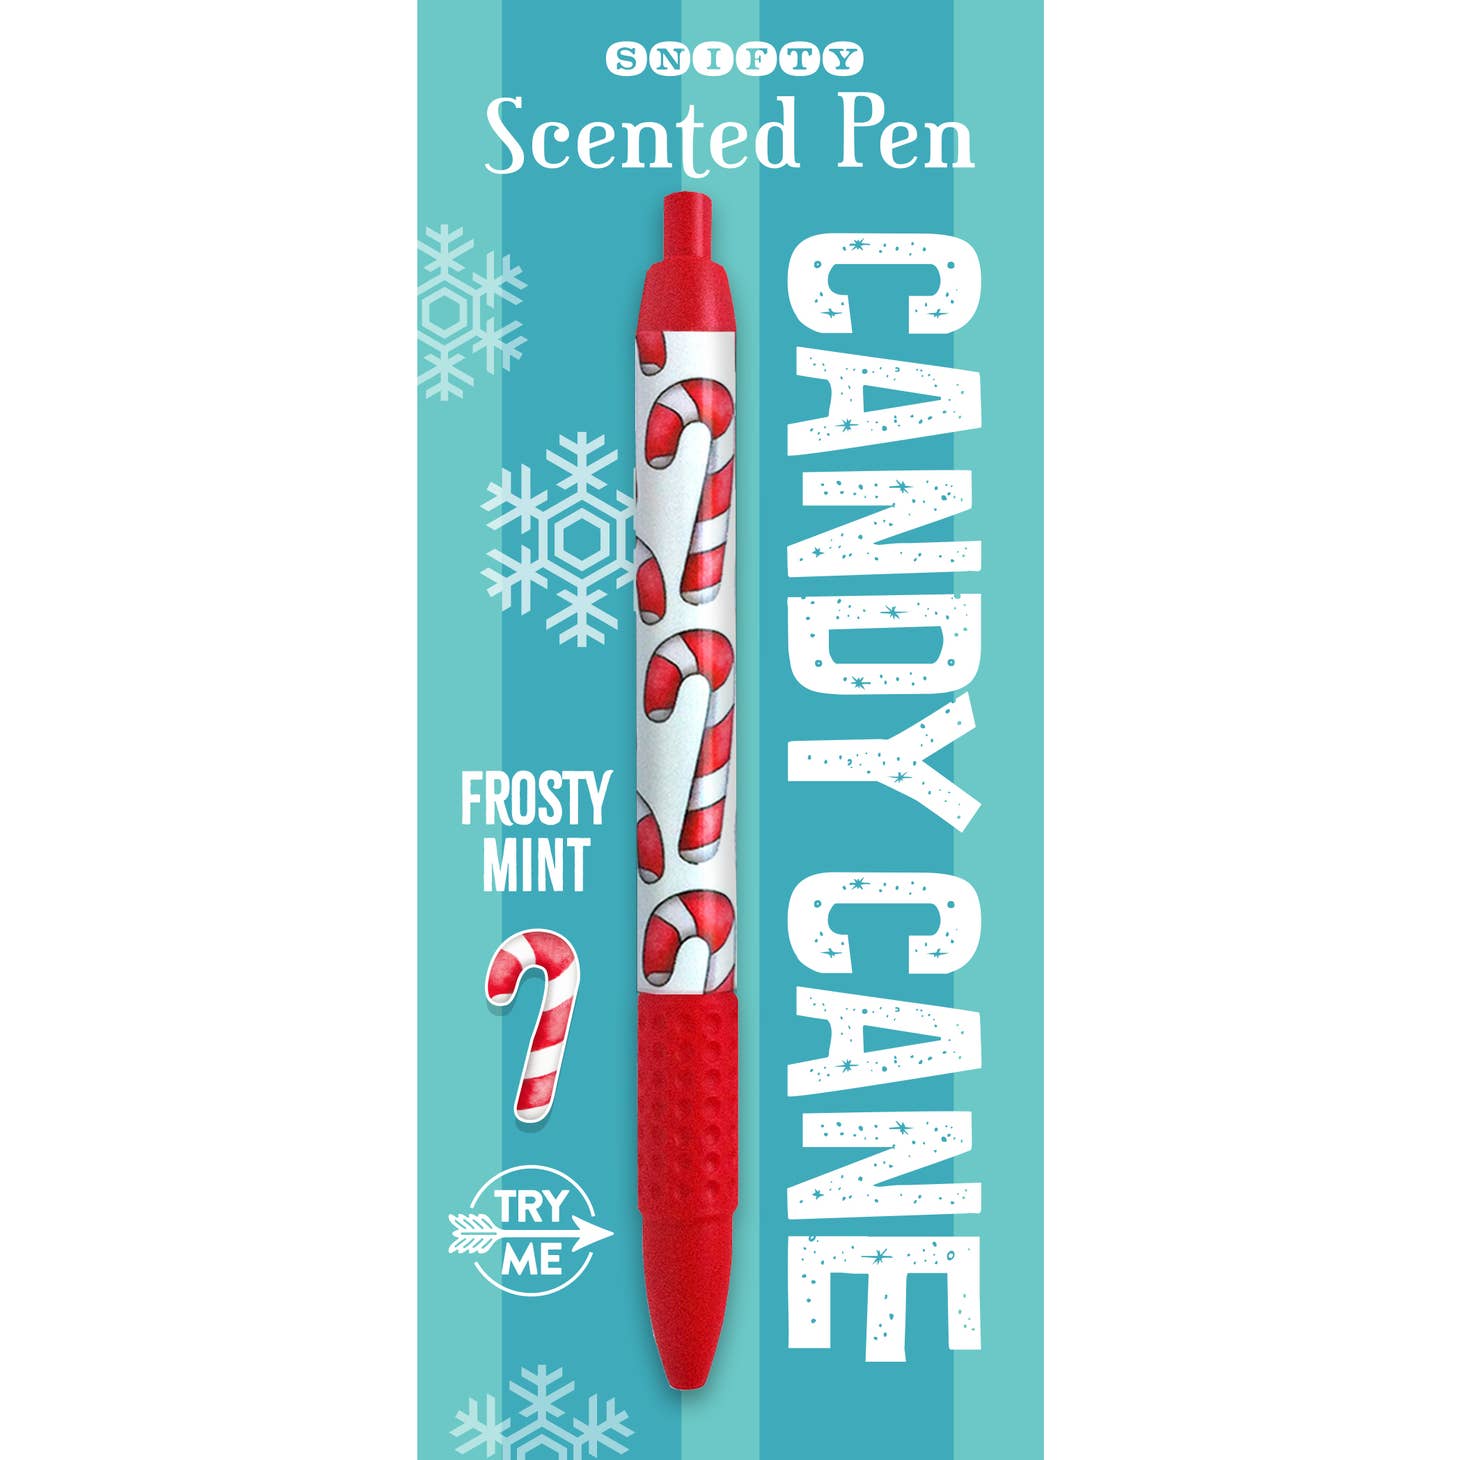 Candy Cane Scented Pen | Giftable Pen | Holidays, Christmas | Novelty Office Desk Supplies